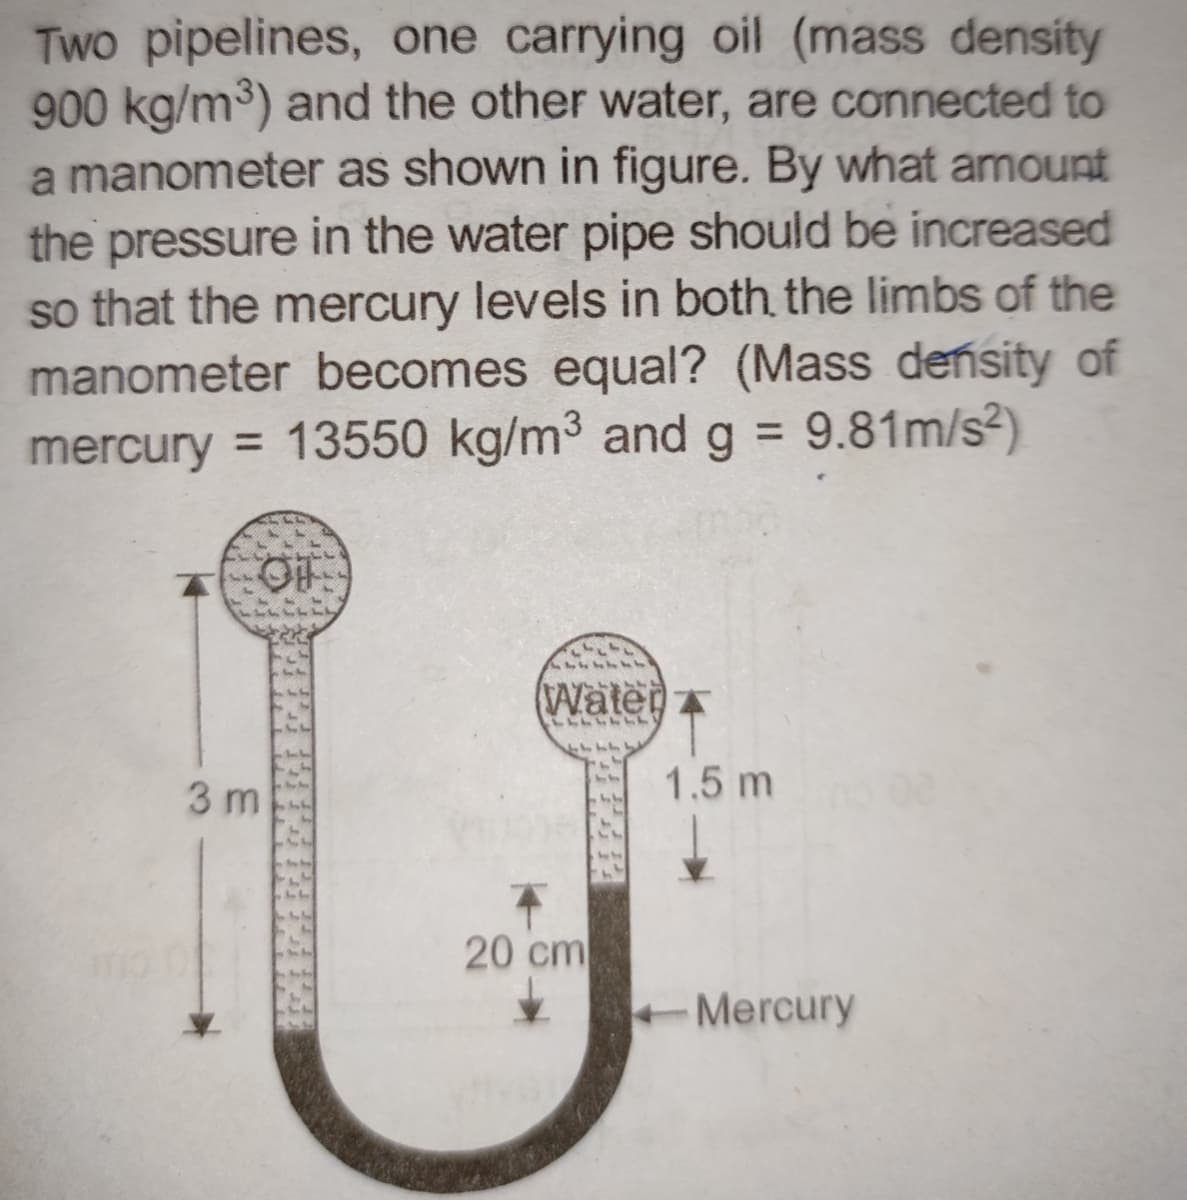 Two pipelines, one carrying oil (mass density
900 kg/m³) and the other water, are connected to
a manometer as shown in figure. By what amount
the pressure in the water pipe should be increased
so that the mercury levels in both the limbs of the
manometer becomes equal? (Mass density of
mercury = 13550 kg/m³ and g = 9.81m/s²)
OF
3 m
Water
11114
20 cm
1.5 m
Mercury